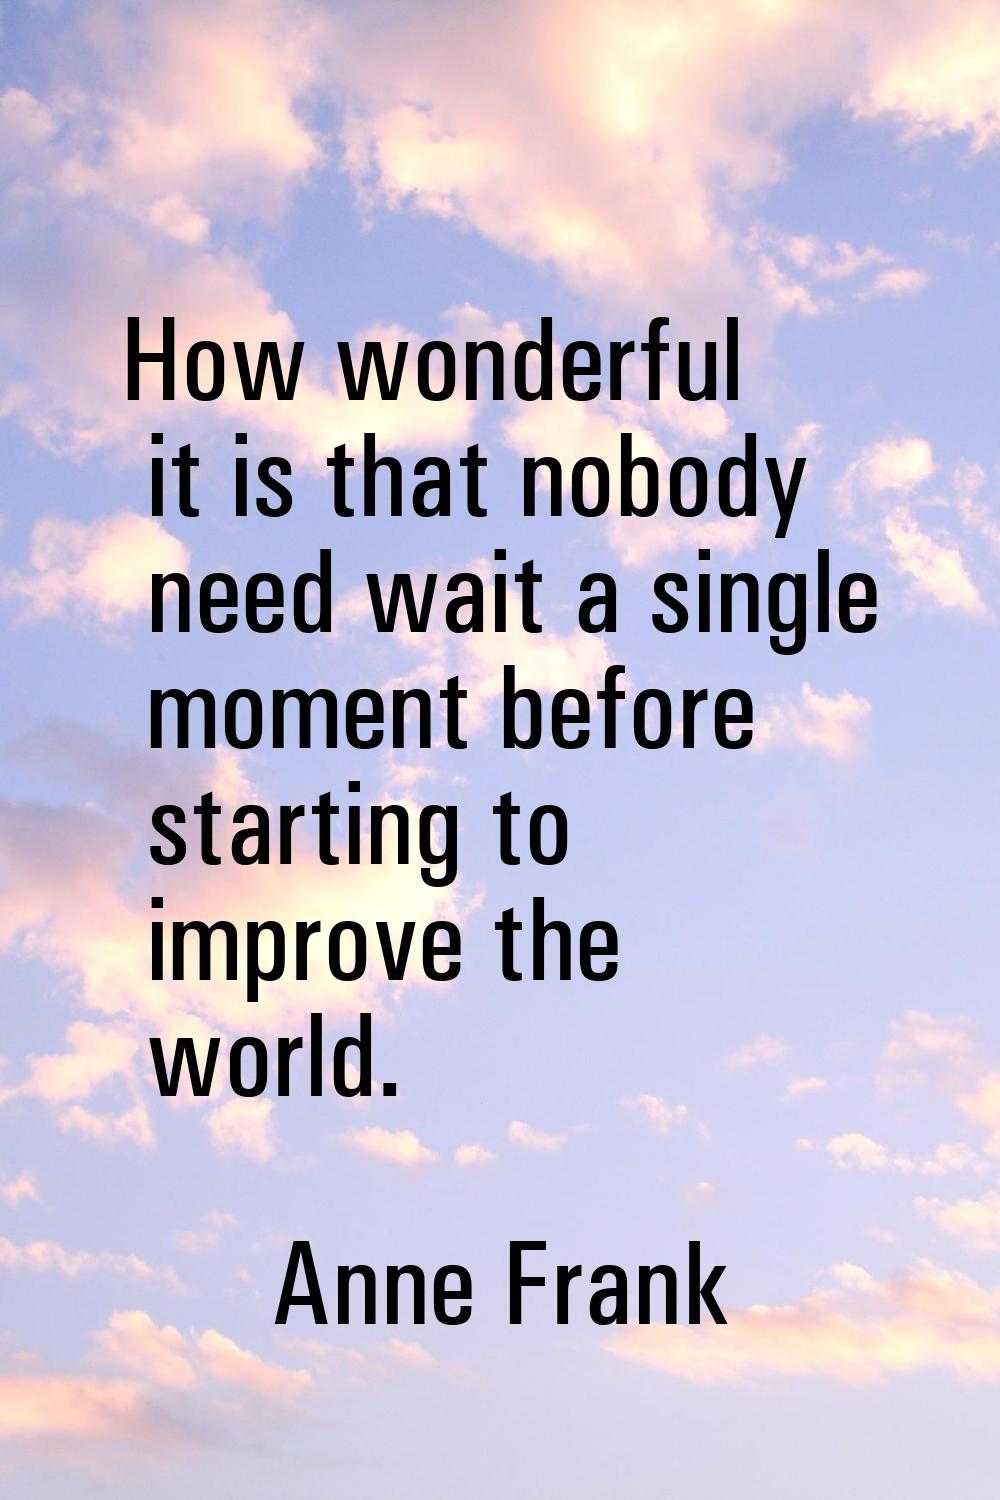 How wonderful it is that nobody need wait a single moment before starting to improve the world.